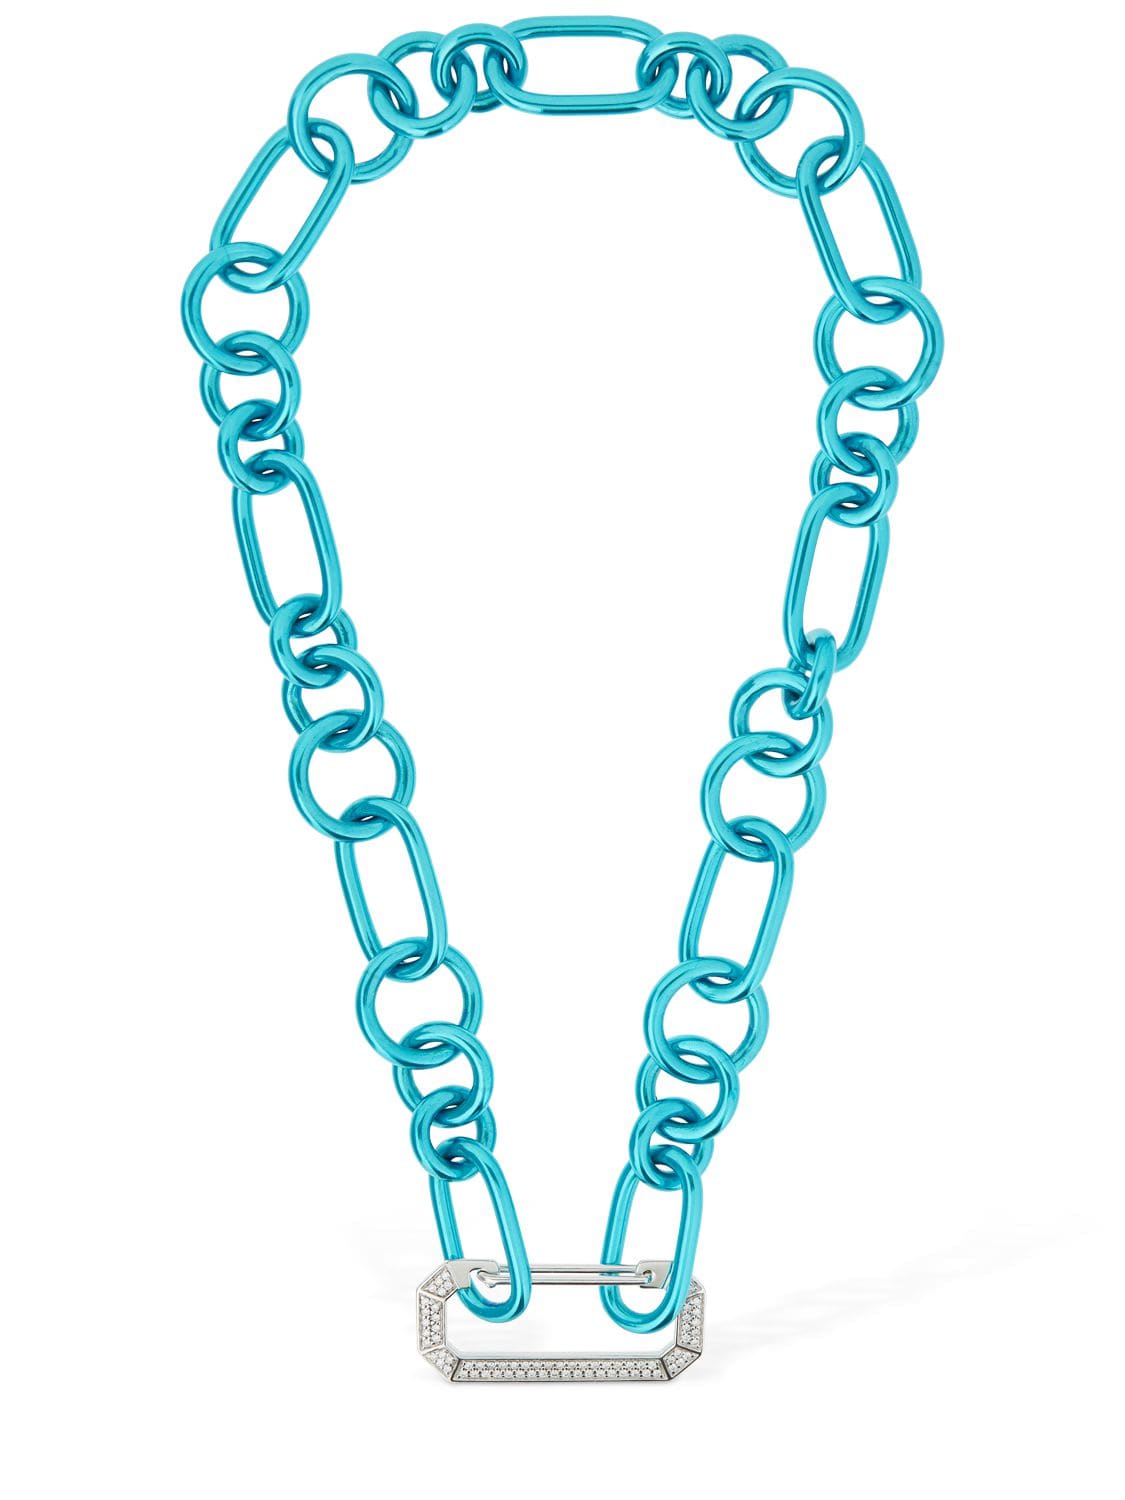 Eéra Special Order - Lucy Metallic Necklace In Silver And 18k White Gold With Diamonds In Blue